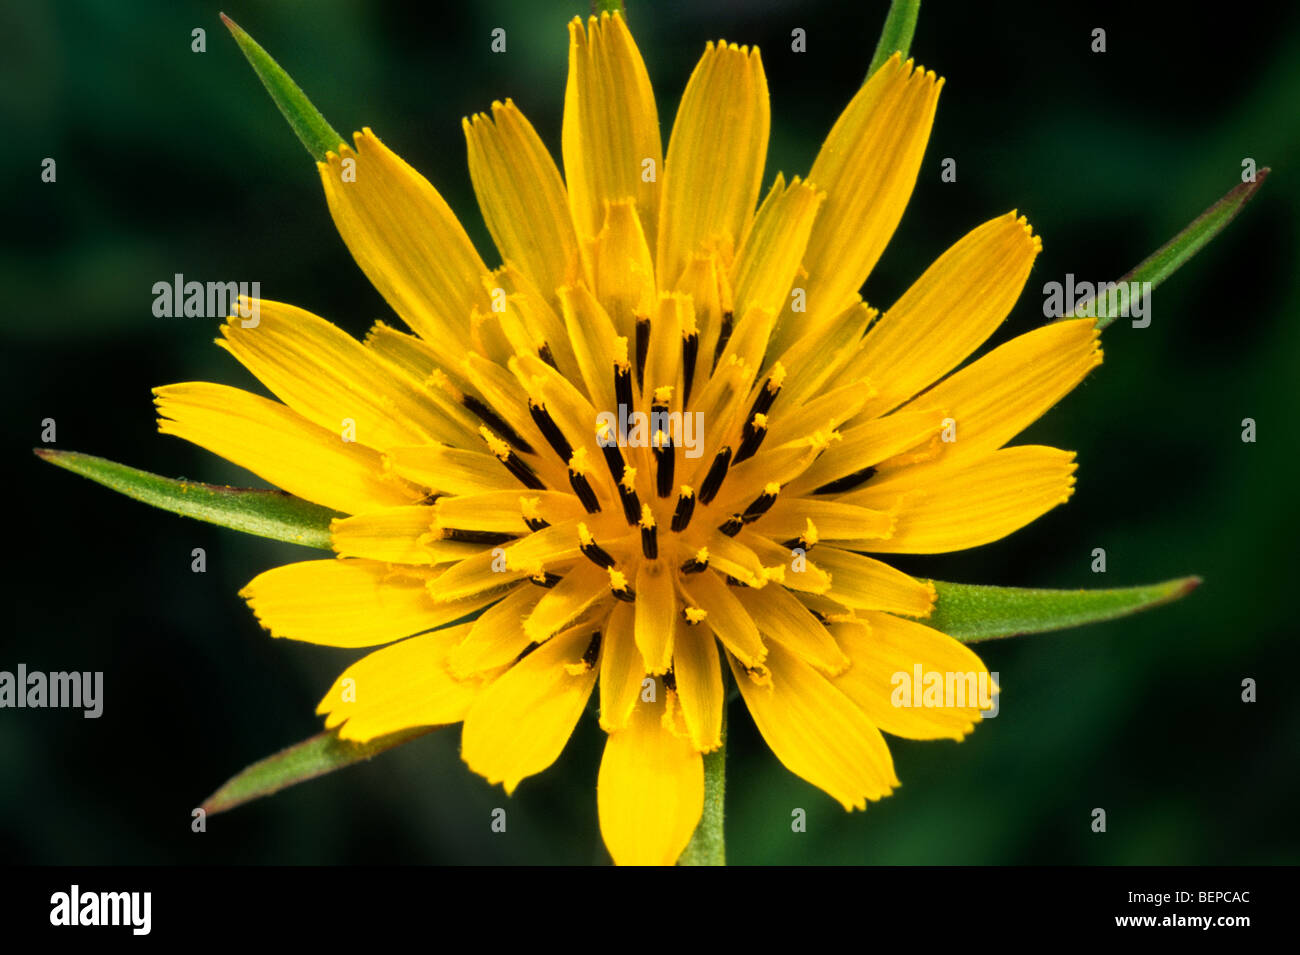 Meadow Salsify / Showy Goat's-beard / Meadow Goat's-beard / Jack-go-to-bed-at-noon (Tragopogon pratensis) in flower Stock Photo